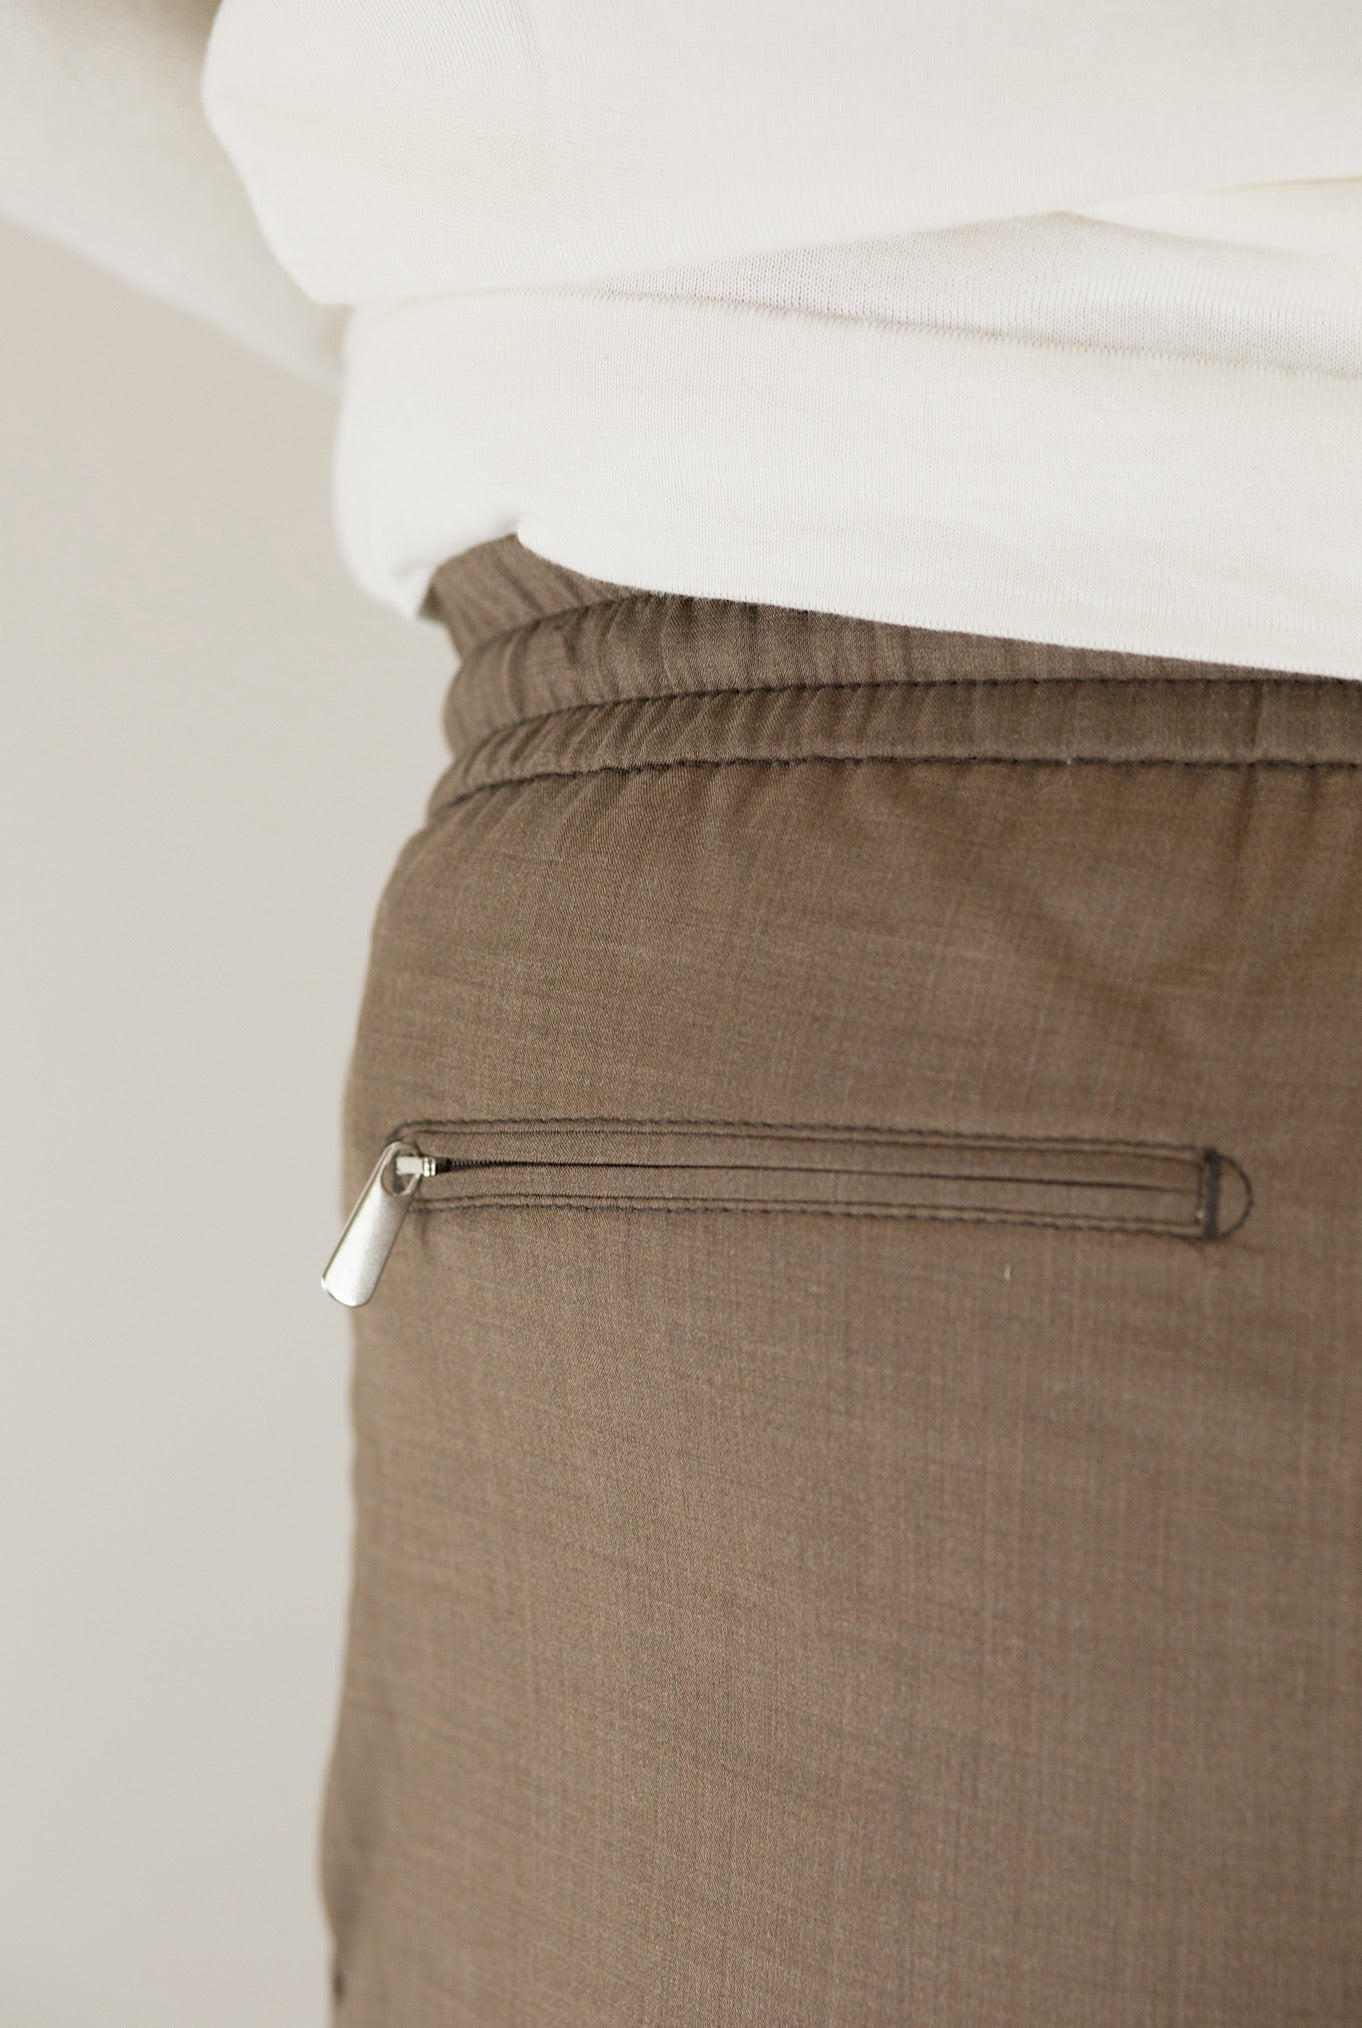 MARCO PESCAROLO Tobacco Wool and Silk Trousers with Drawstring